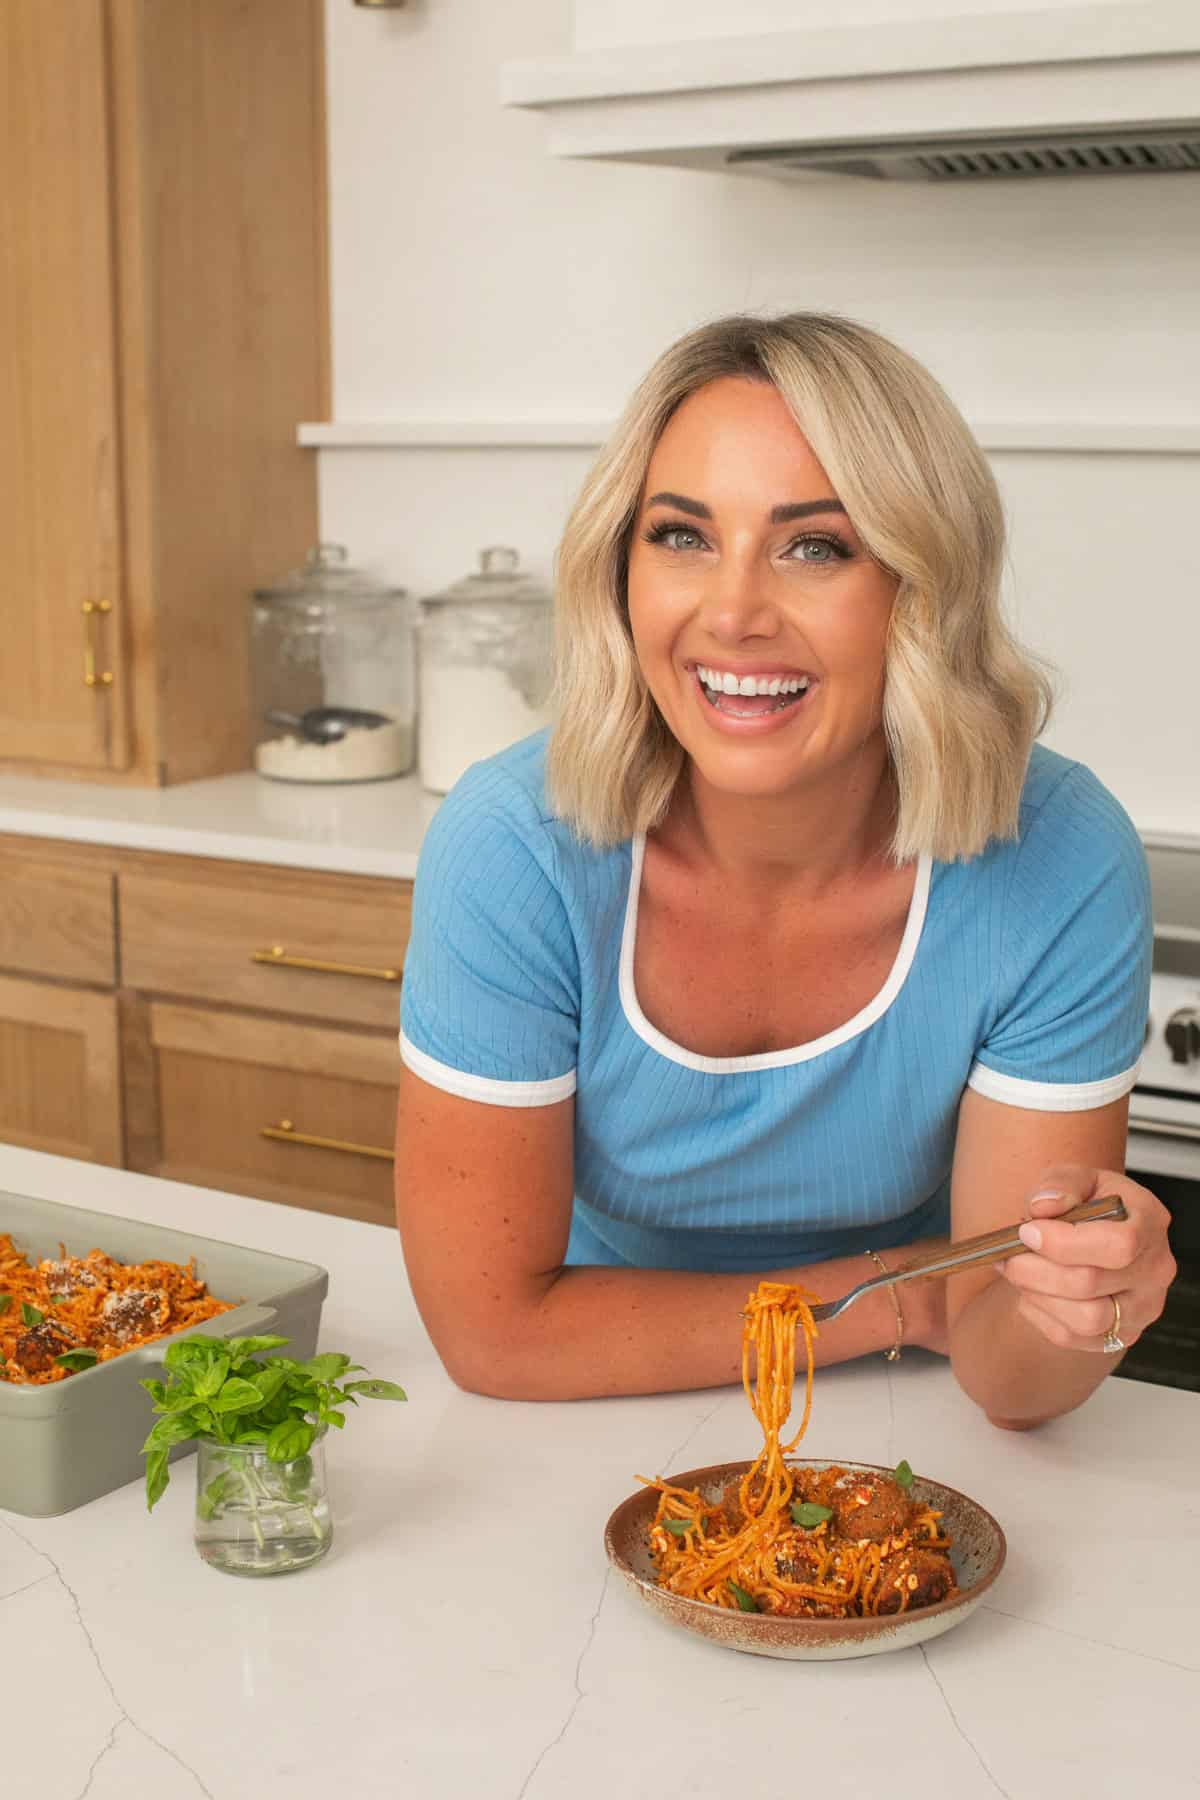 Danielle in a bright shirt in a kitchen with a plate of spaghetti and meatballs.